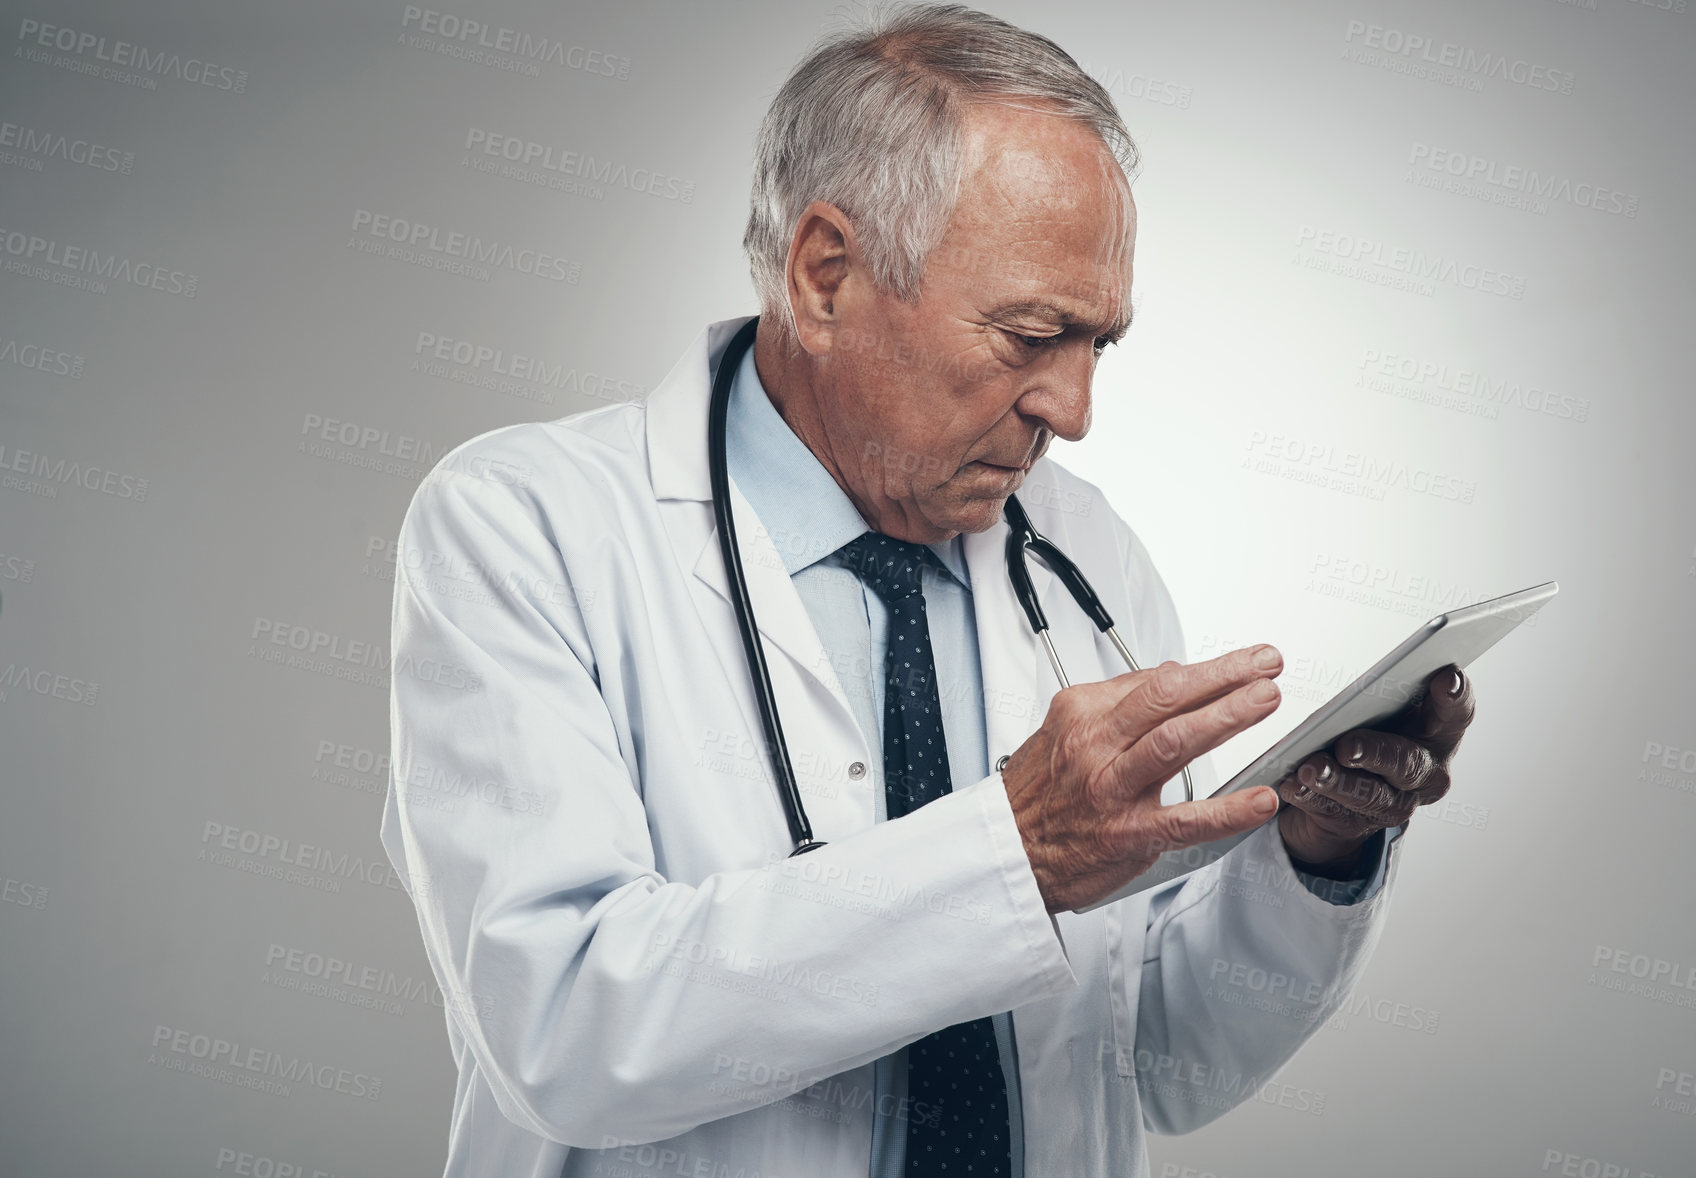 Buy stock photo Shot of an elderly doctor using a digital tablet in a studio against a grey background